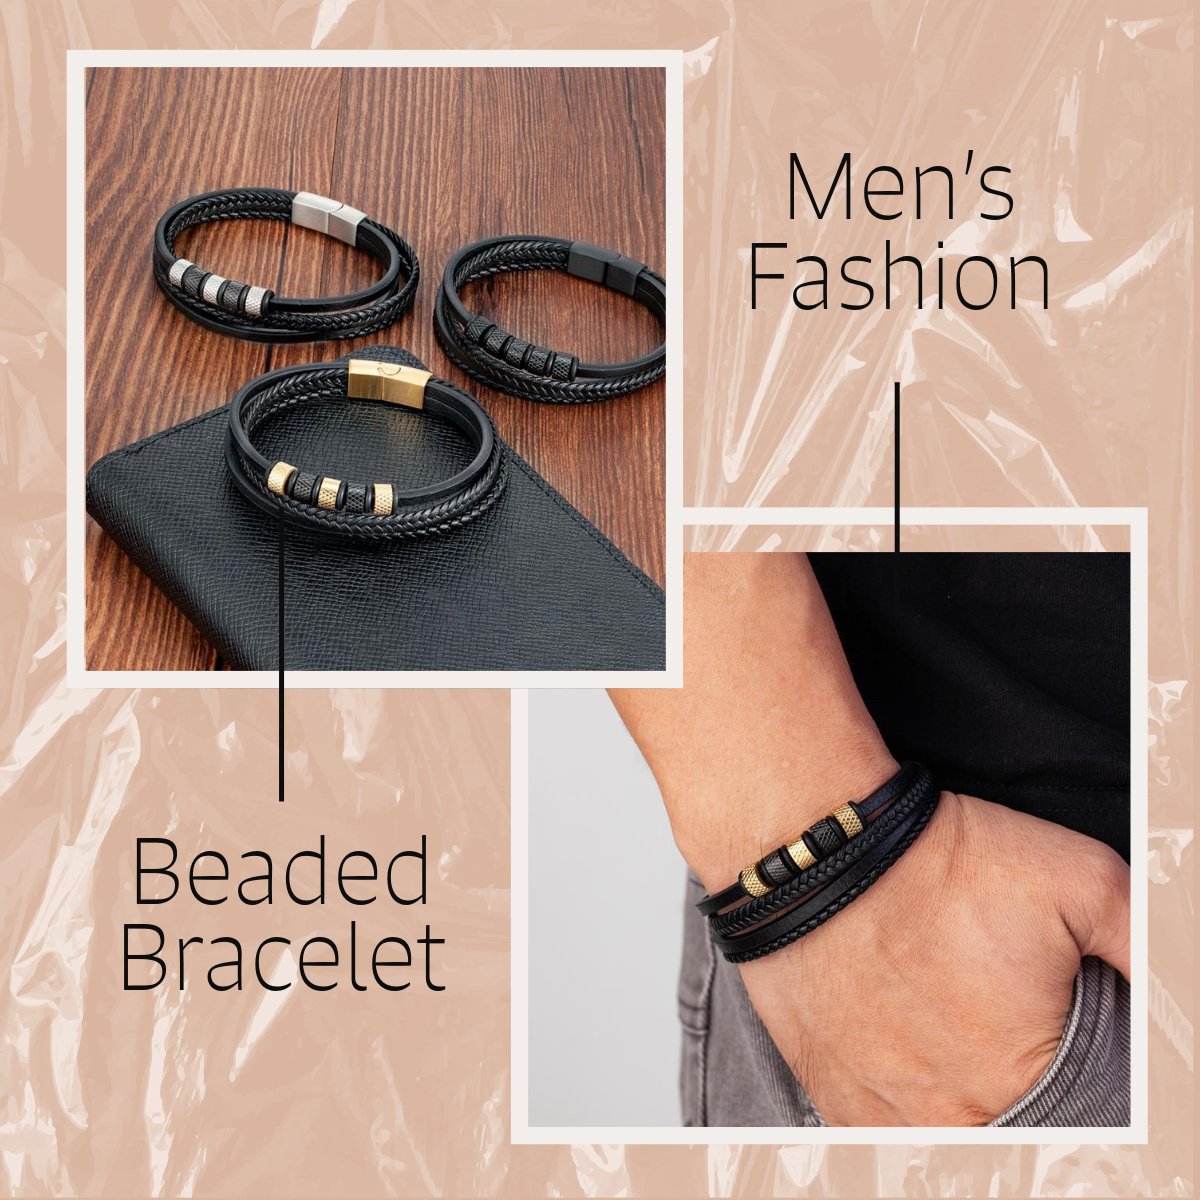 Ready for your next level style upgrade? 👈

Then you have found just the right bracelet accessory with hot offers now on silverkonik! 

#Bracelet #Fashion #menFashion #Jewelry #mengift #gift #silverkonik